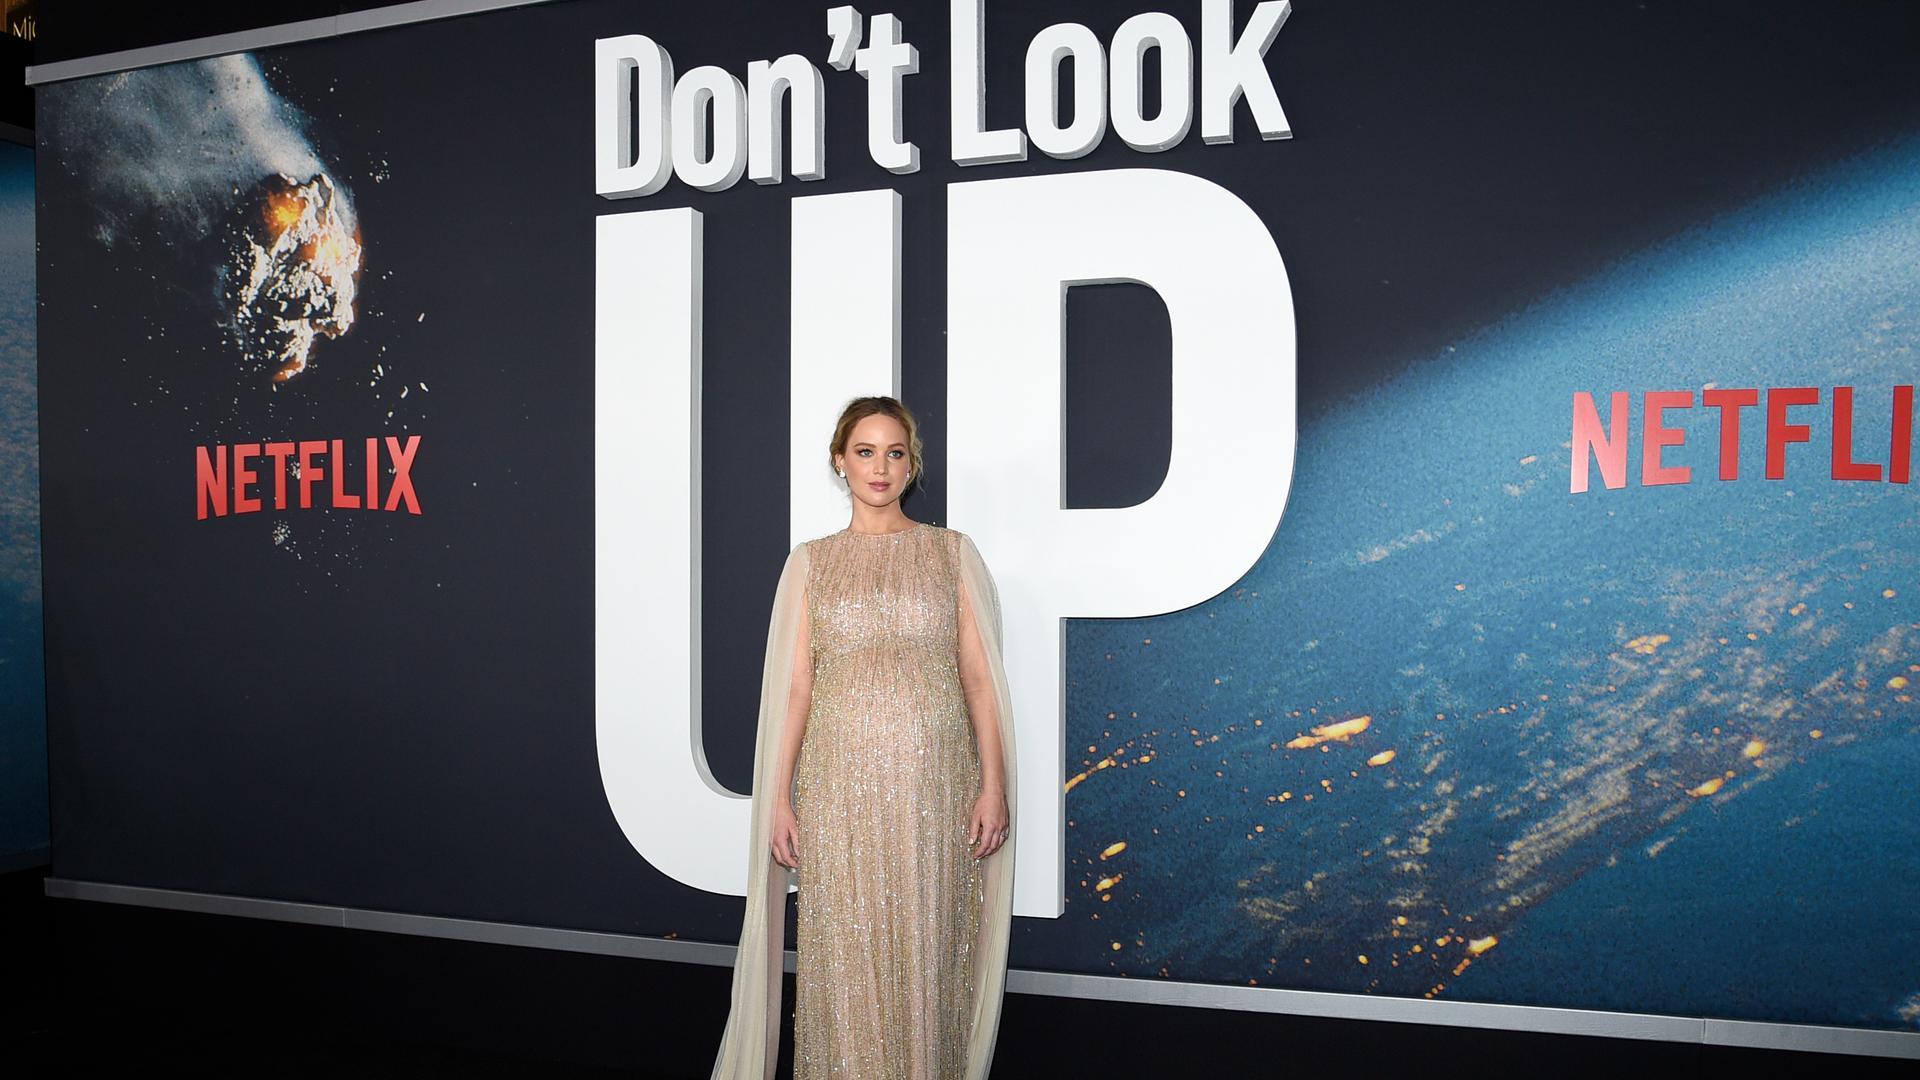 Jennifer Lawrence attends the world premiere of "Don't Look Up" at Jazz at Lincoln Center on Sunday, Dec. 5, 2021, in New York.